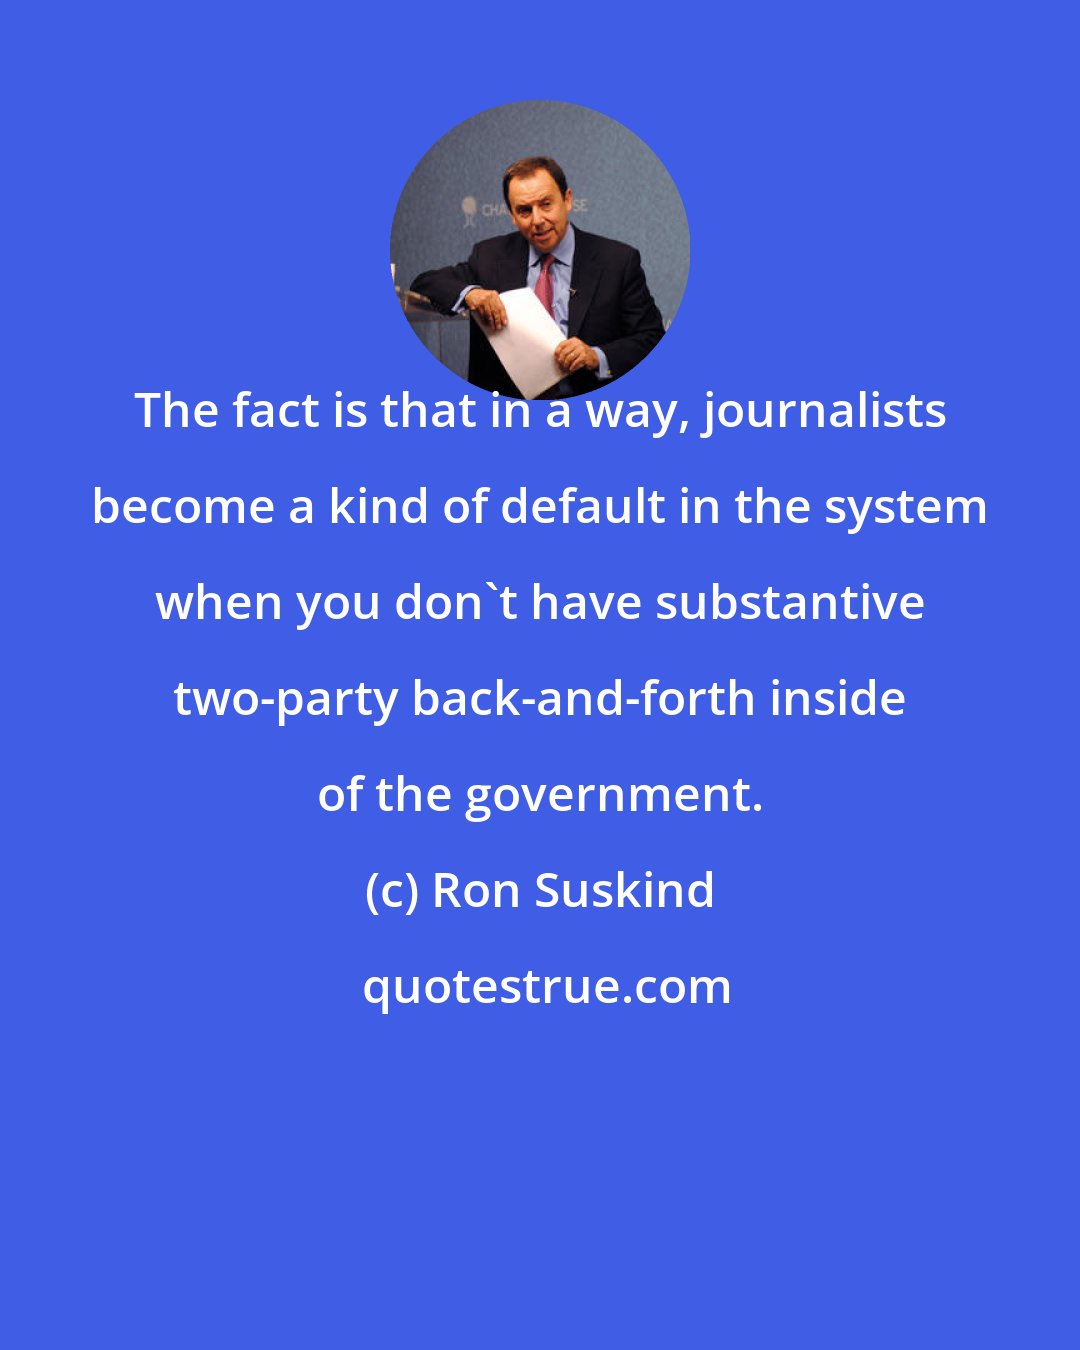 Ron Suskind: The fact is that in a way, journalists become a kind of default in the system when you don't have substantive two-party back-and-forth inside of the government.